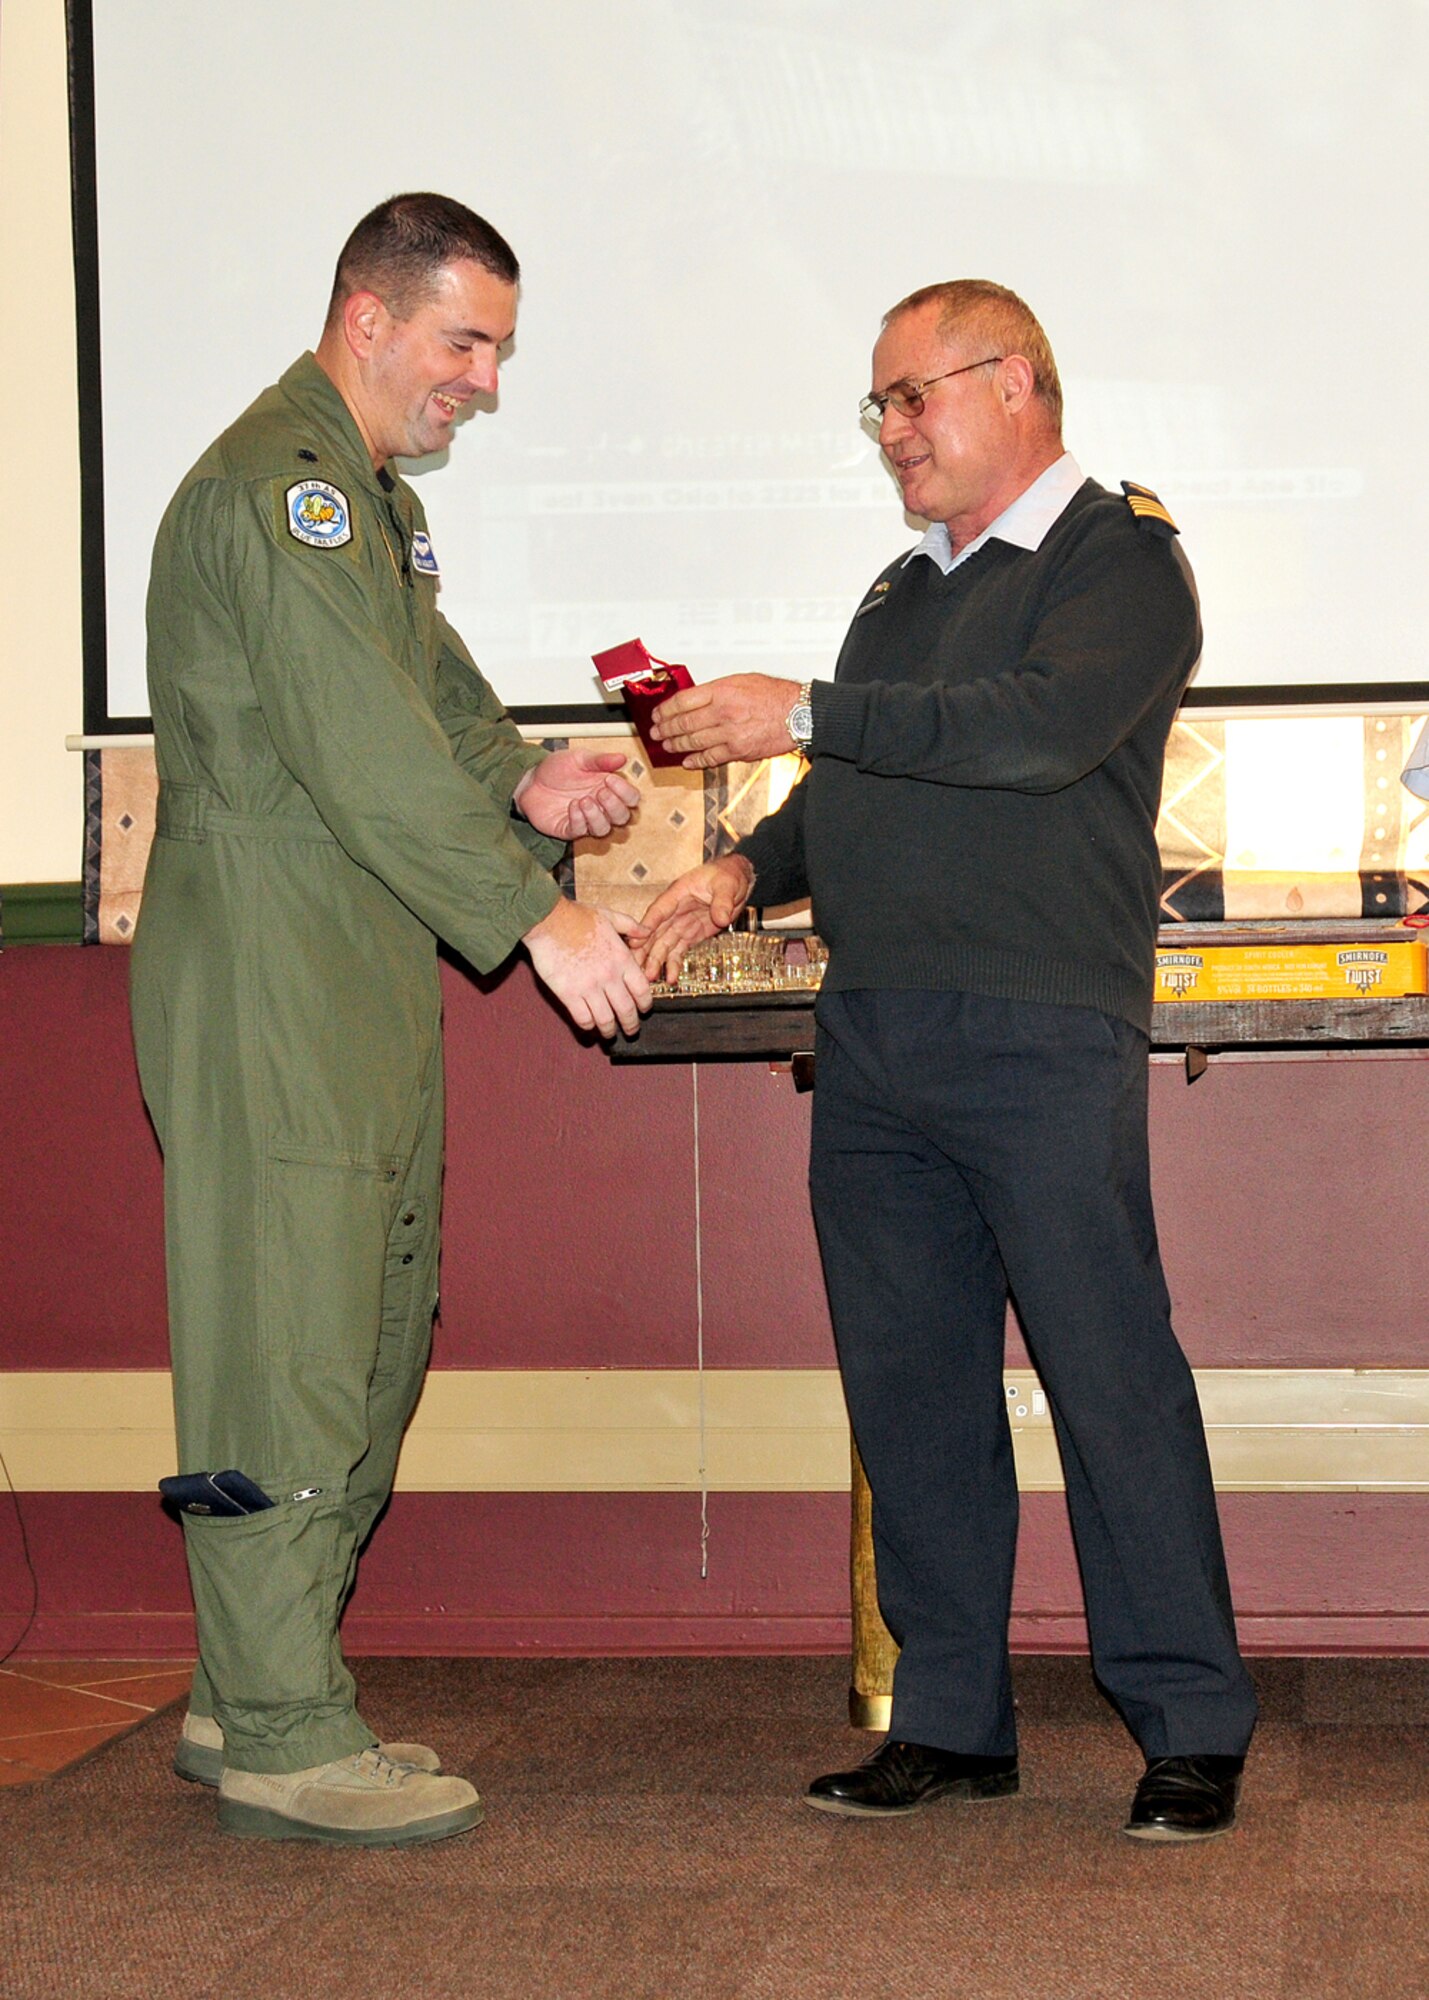 United States Air Force Lt. Col Mark August, 37th Airlift Squadron commander, Ramstein Air Base, Germany, accepts a gift from Col. Herman Olmesdahl, 28th Squadron commander, Ysterplaat Air Force Base, South Africa, Sept. 22, 2008. (U.S. Air Force photo by Staff Sgt. Markus Maier)(Release)